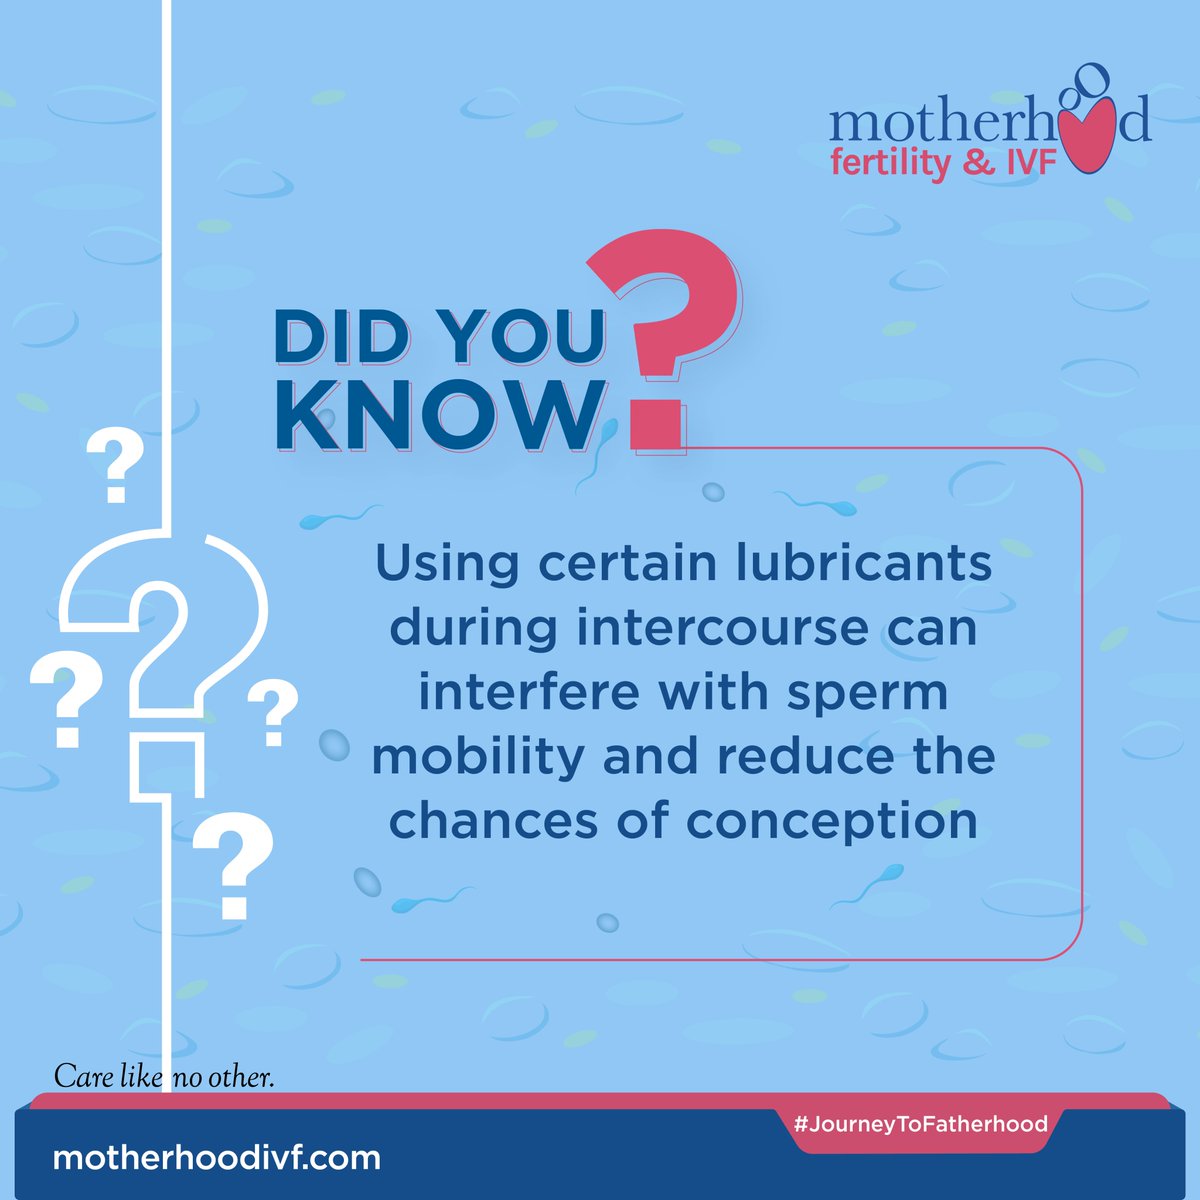 Some lubricants contain ingredients that may adversely affect sperm mobility, potentially impacting fertility. Consider choosing fertility-friendly lubricants to optimize your chances of successful conception.
#JourneyToFatherhood #MotherhoodFertilityAndIVF #MotherhoodIVF #IVF